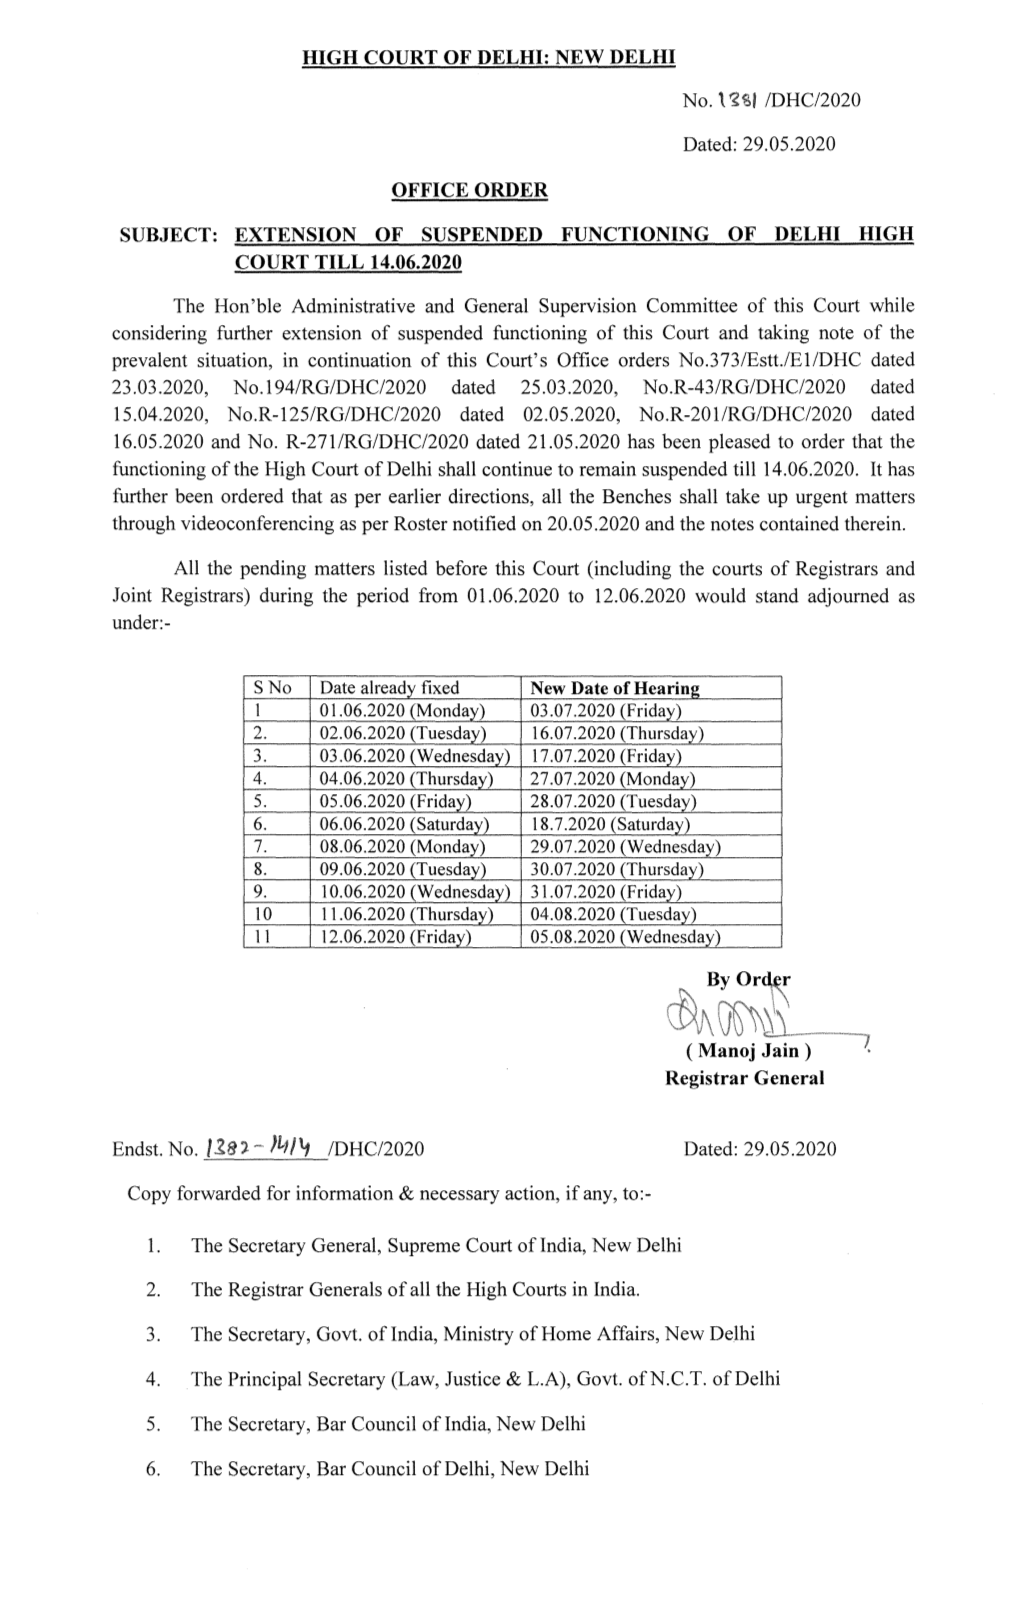 NEW DELHI No. , IDHC/2020 Dated: 29.05.2020 OFFICE ORDER